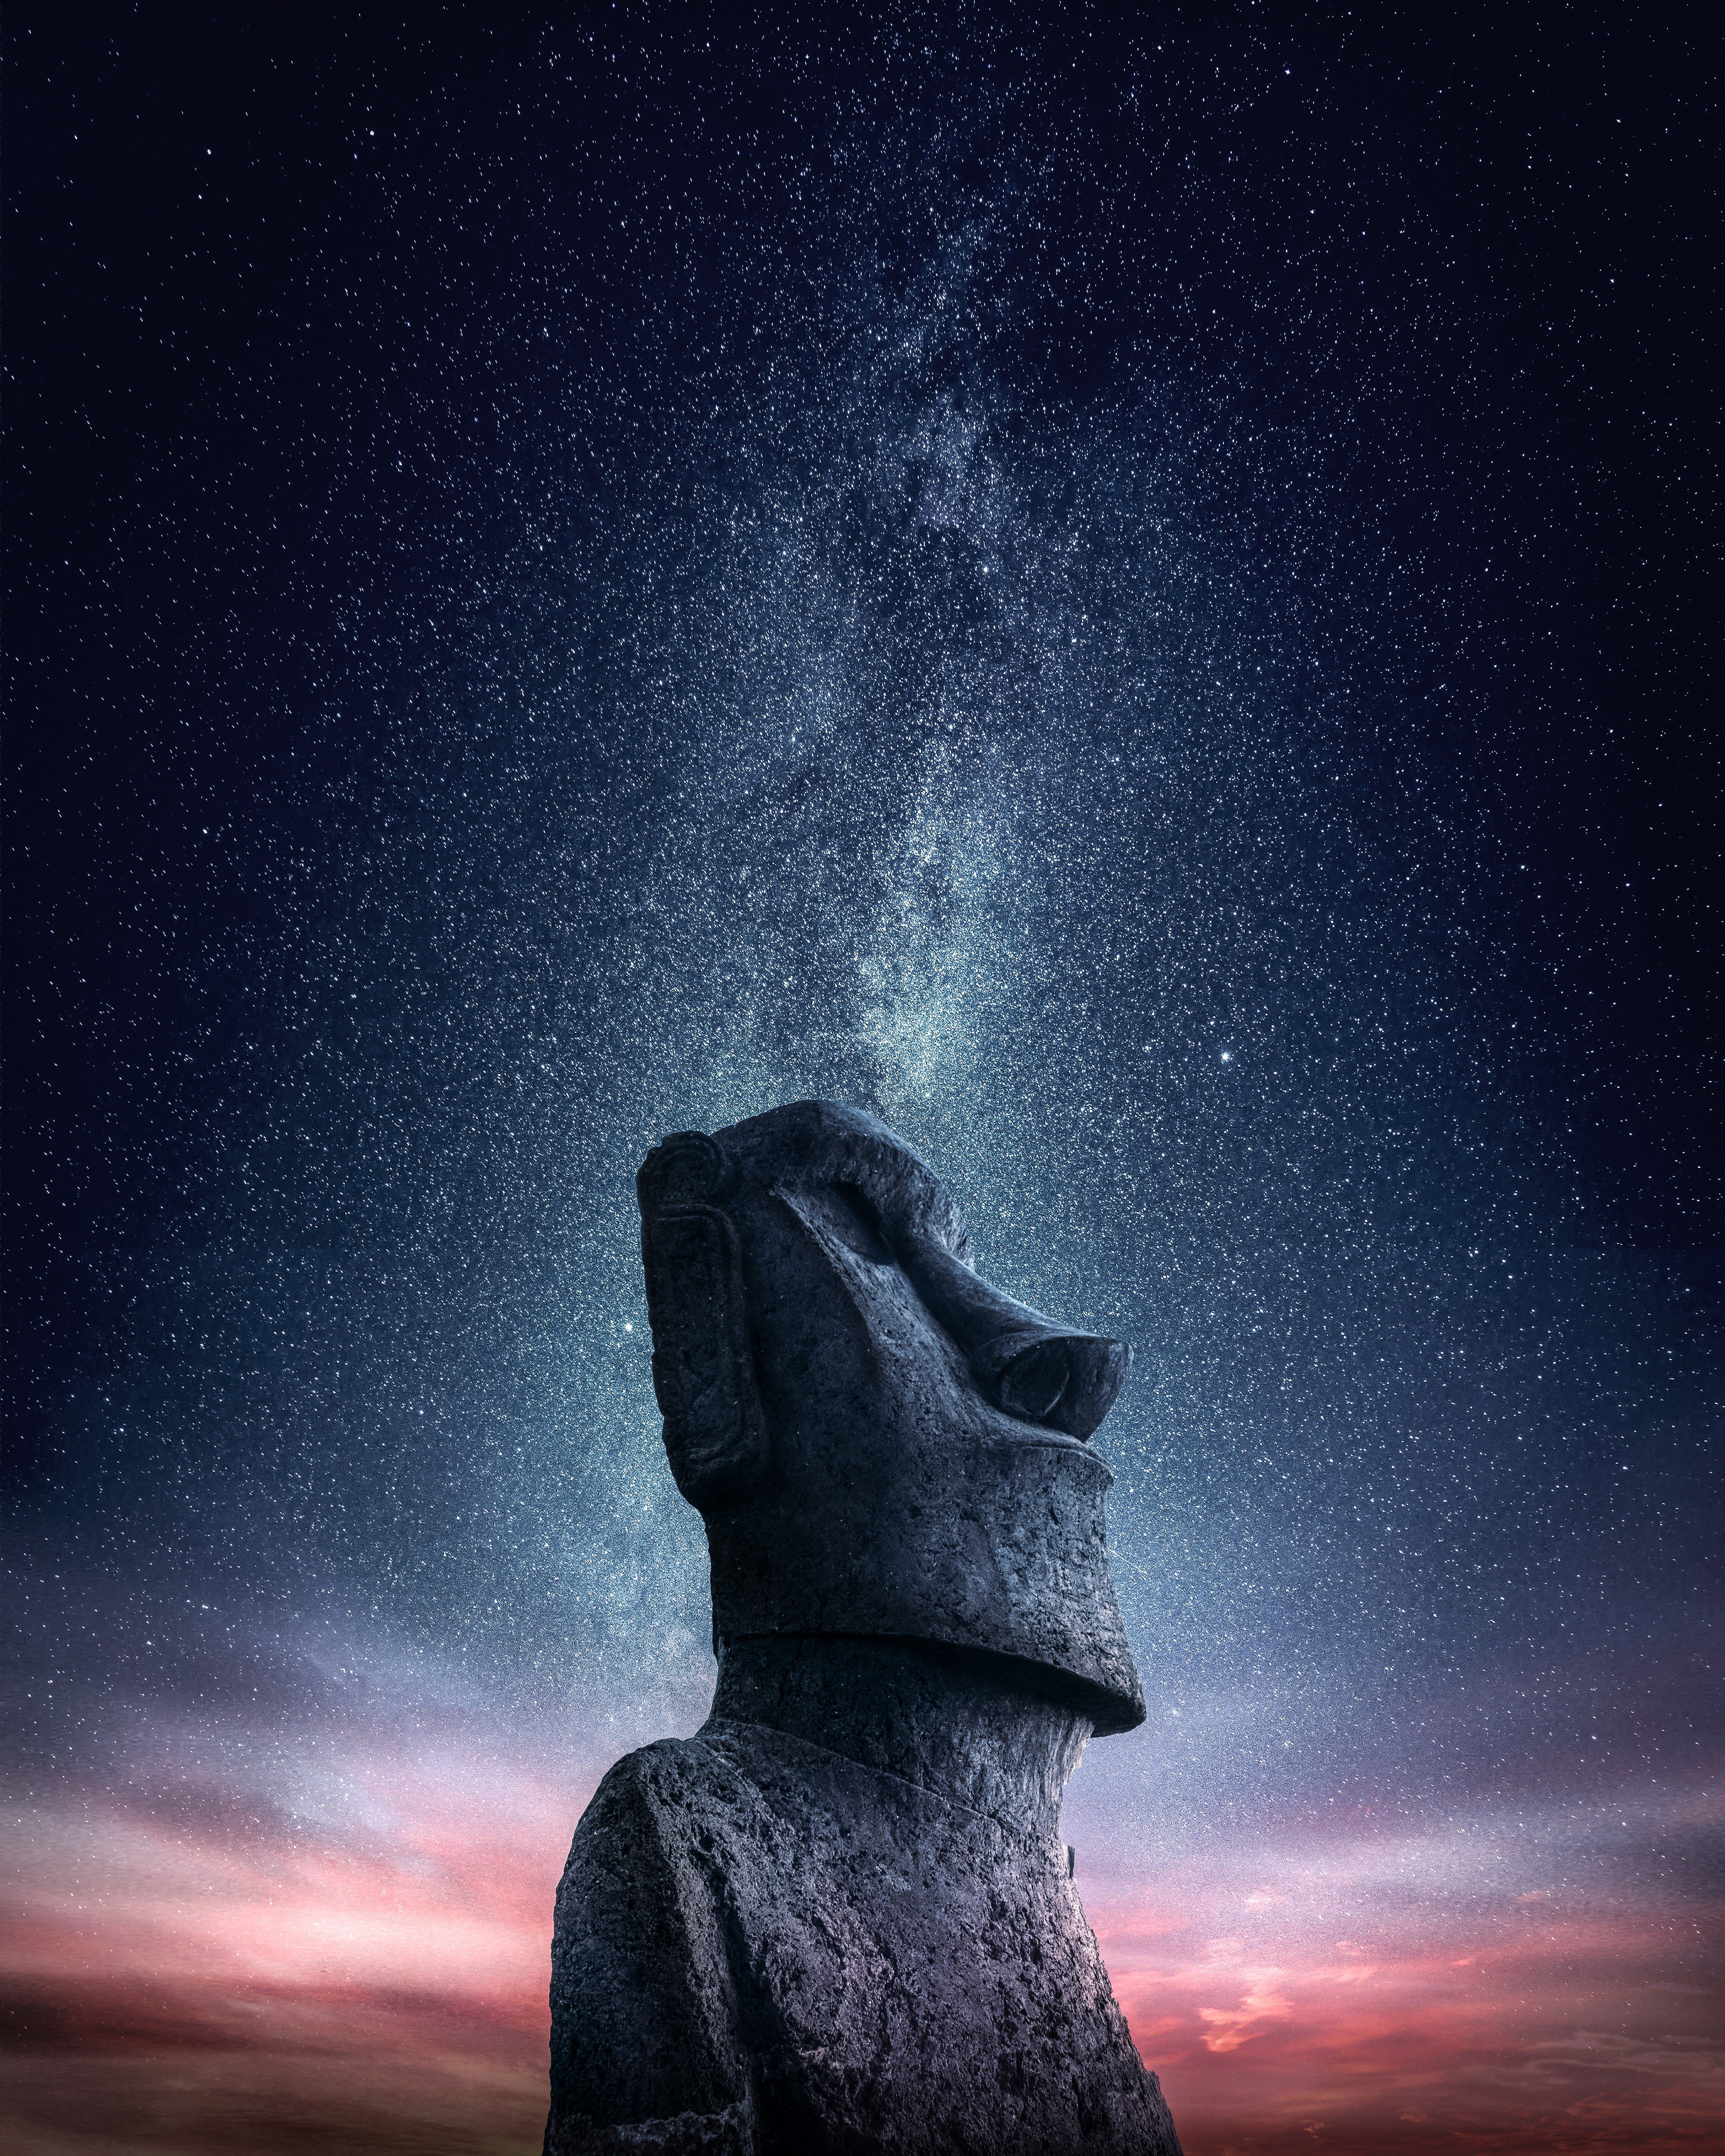 miscellaneous, easter straits, moai, miscellanea, starry sky, statue, idol, easter strow Full HD